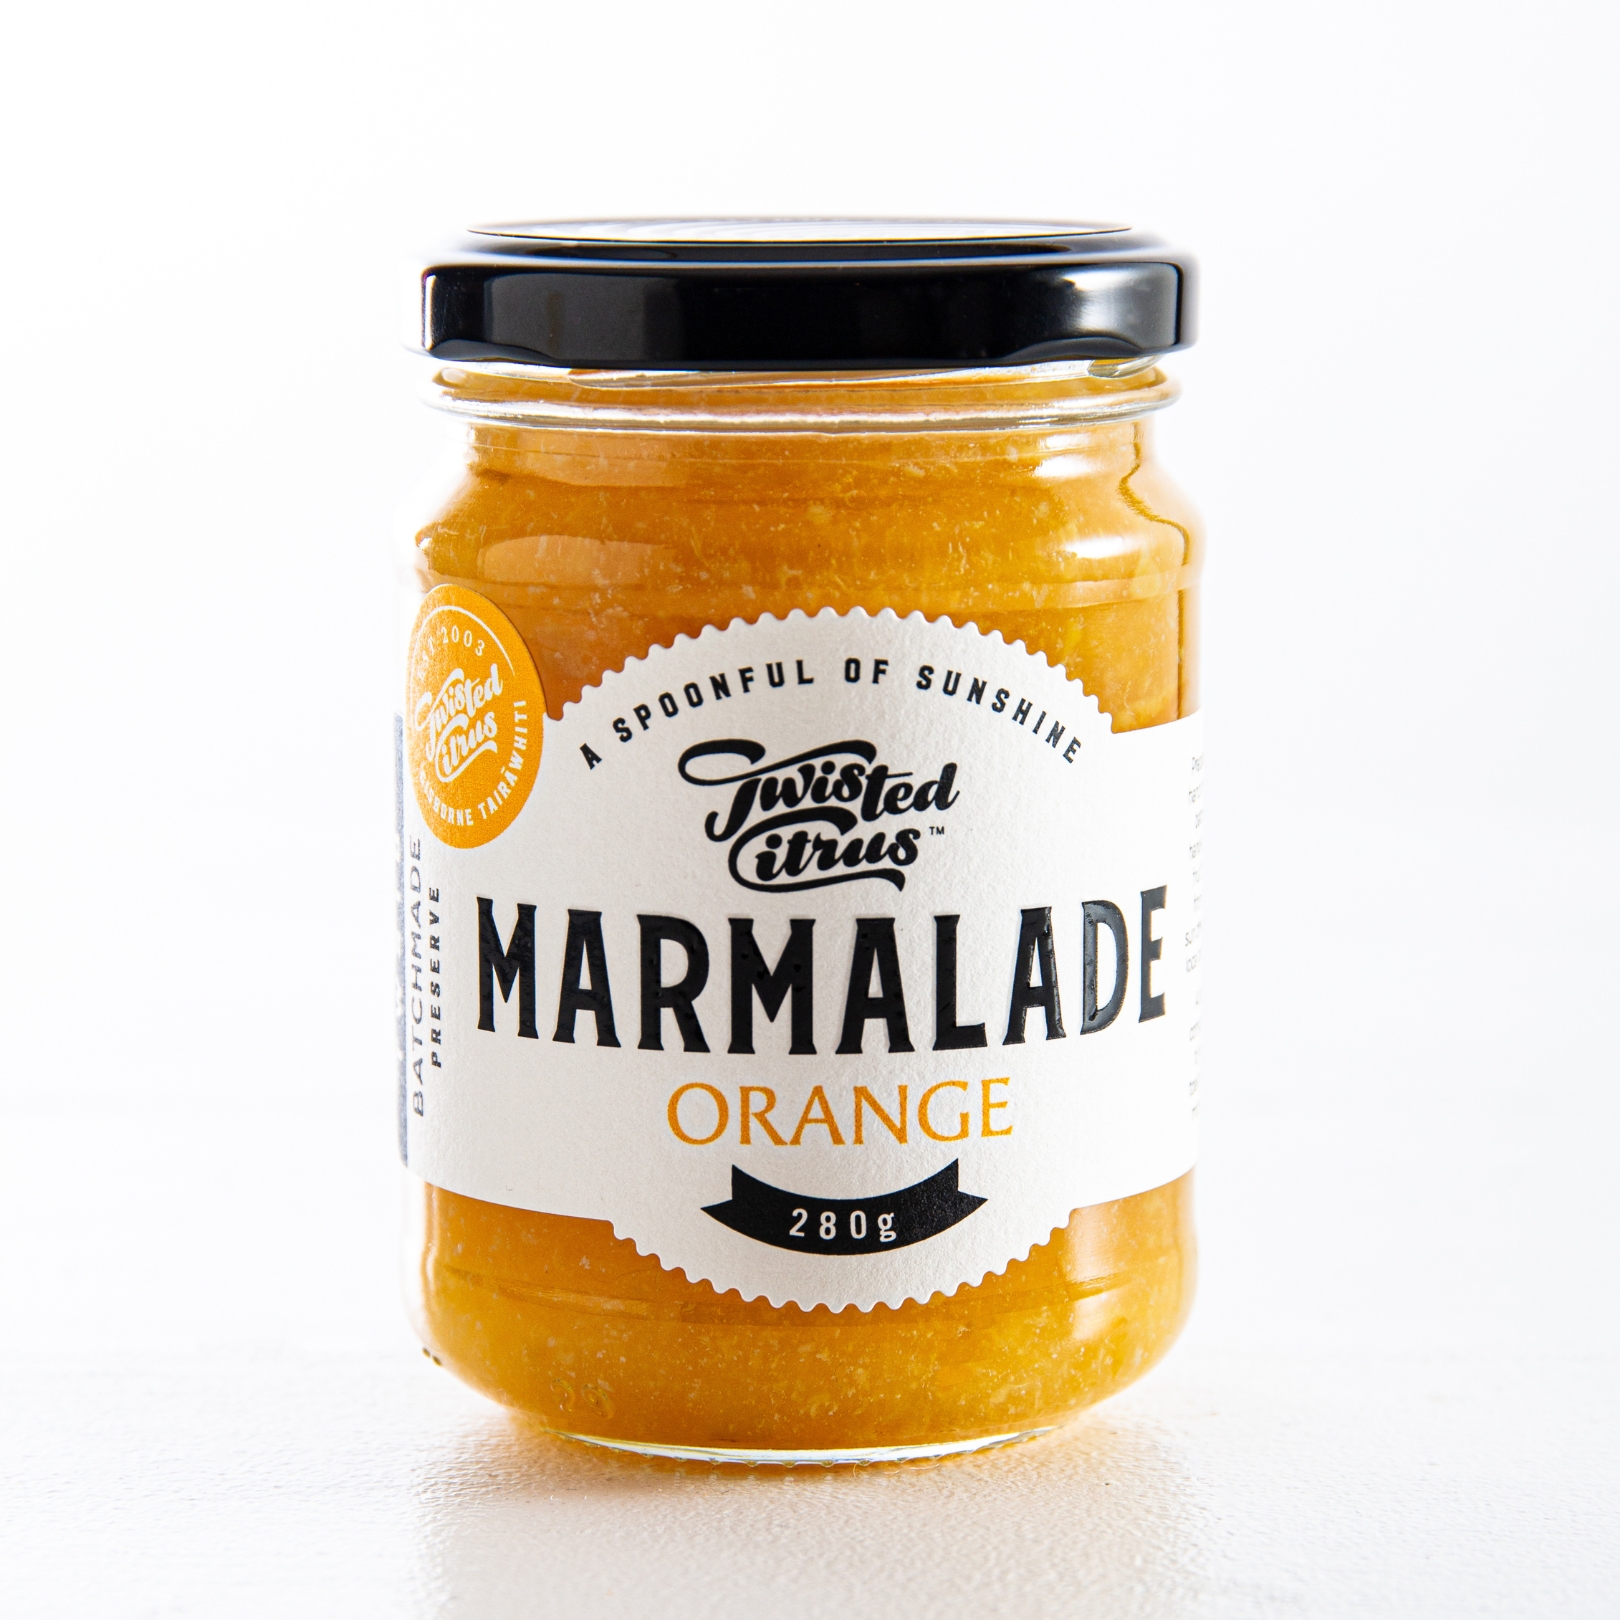 Buy Marmalade Online NZ - Twisted Citrus